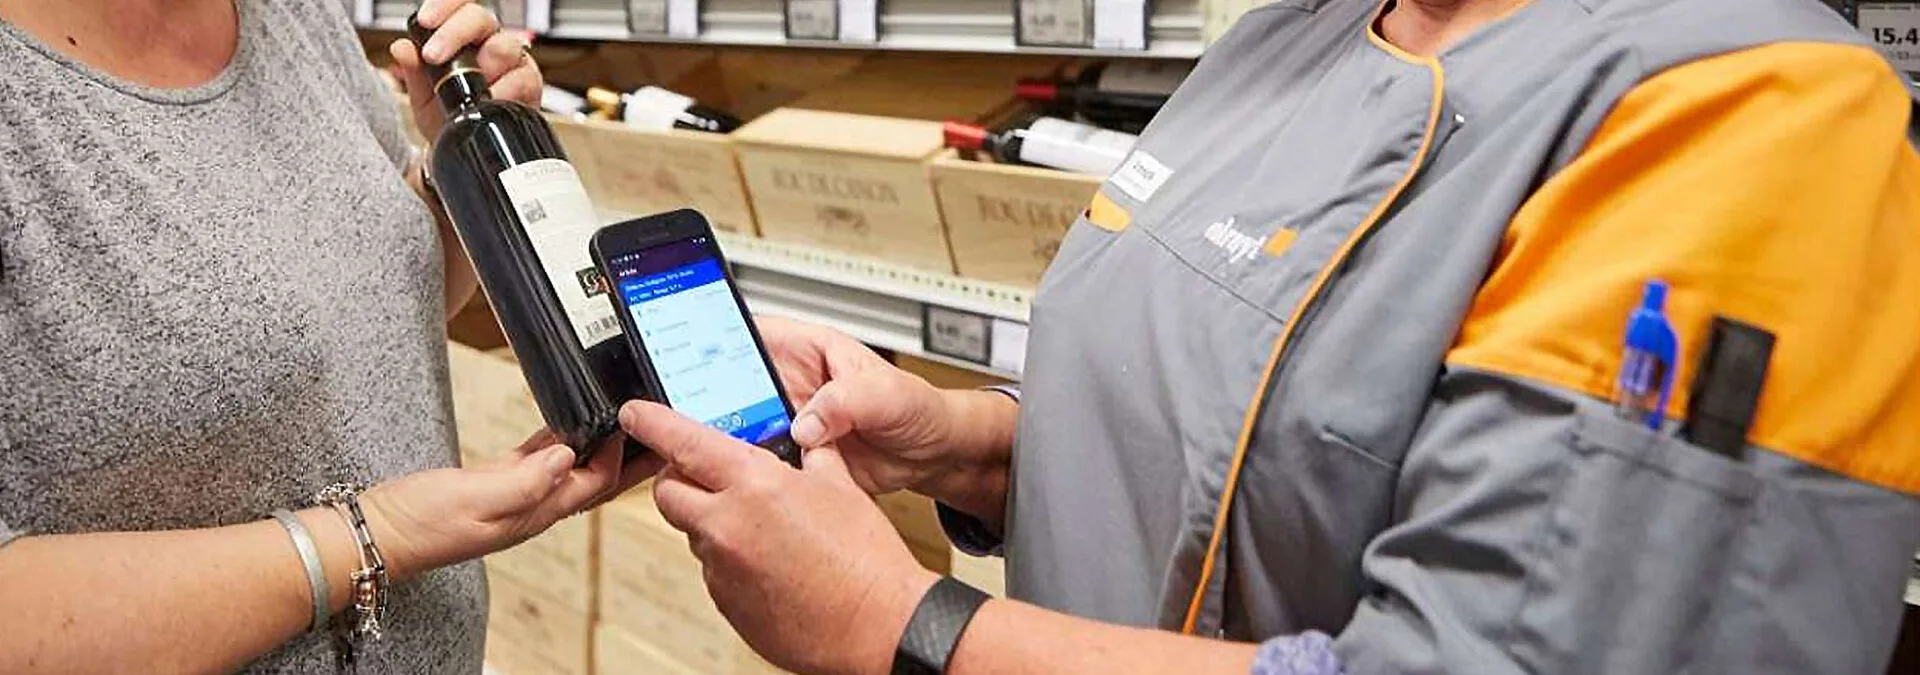  Smartphone Scanning Streamlines Store Operations and Increases Productivity - IoT ONE Case Study